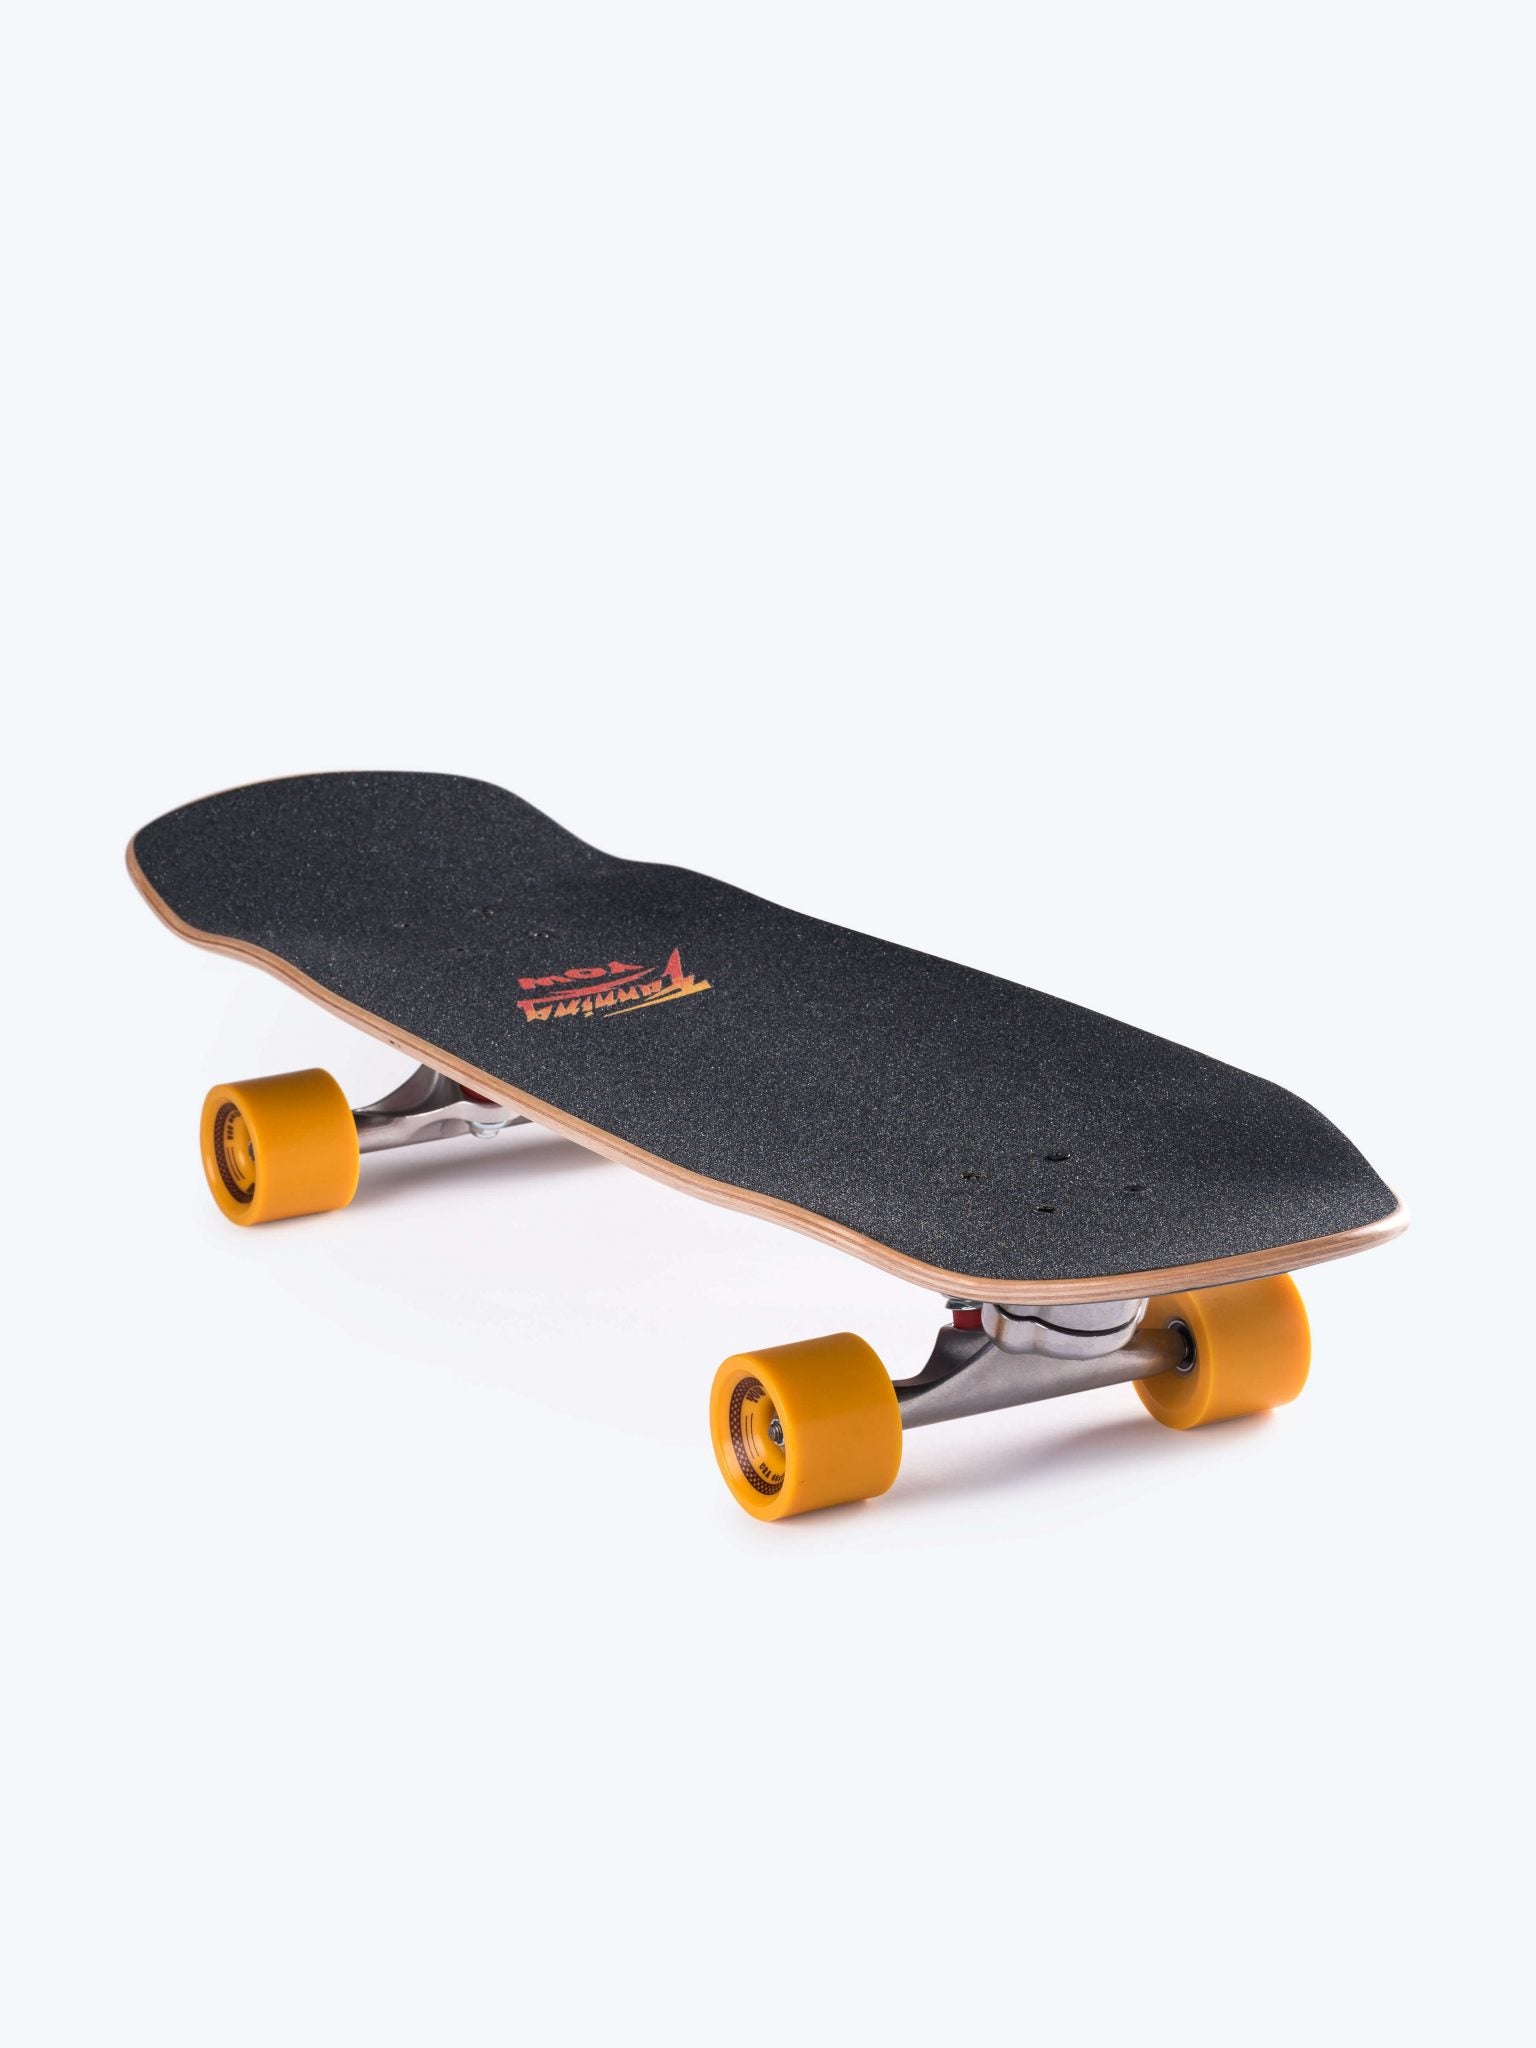 Yow Surfskate Fanning Falcon Performer 33.5 Signature Series